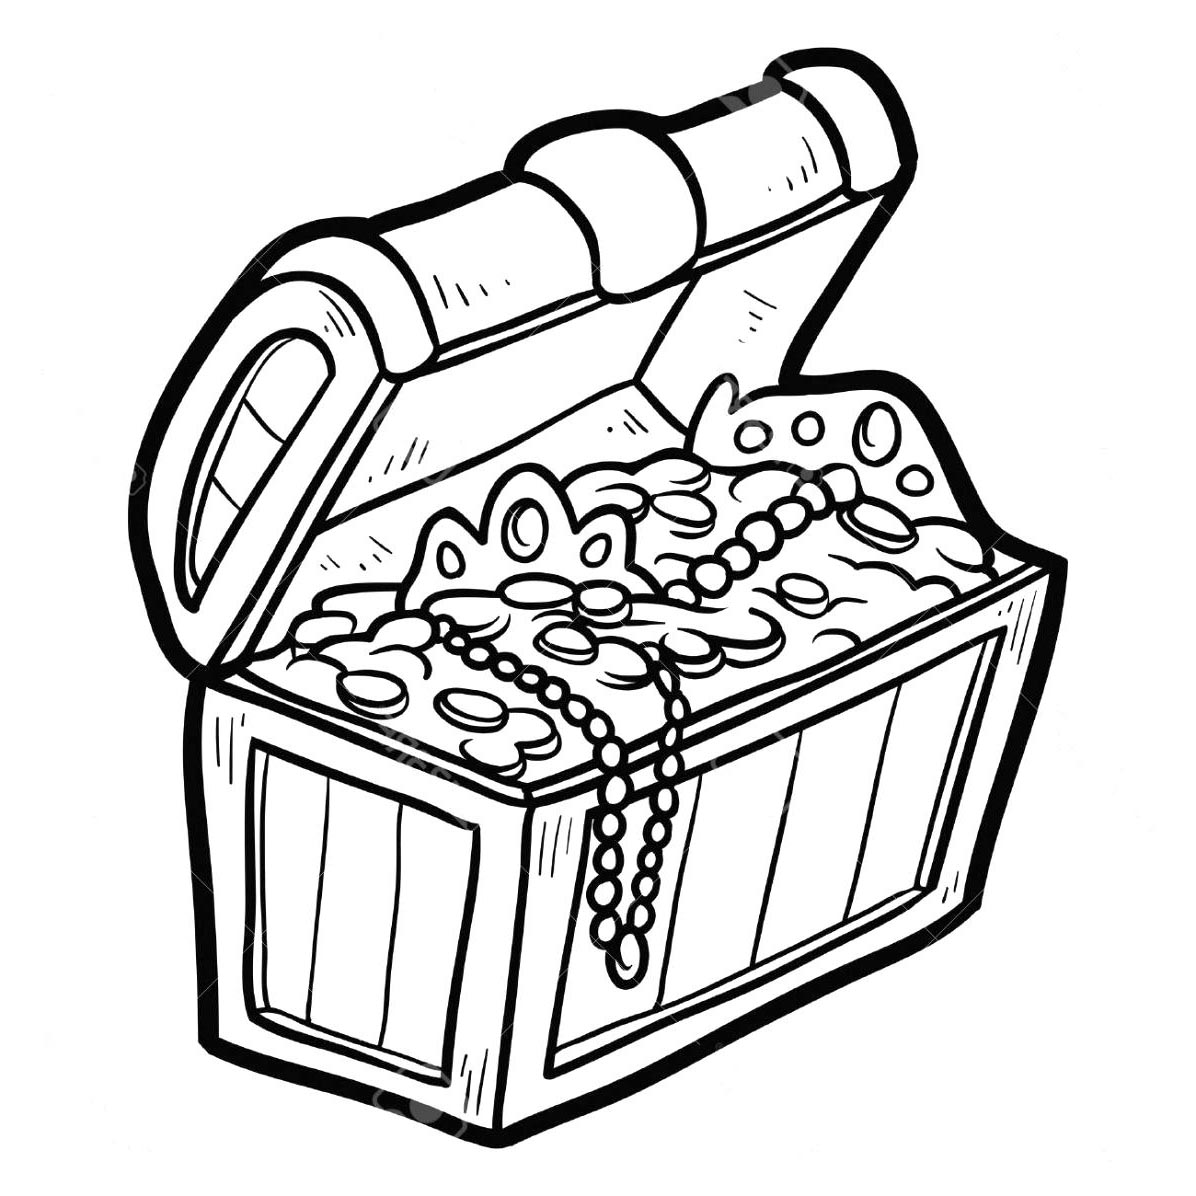 Treasure chest drawing.